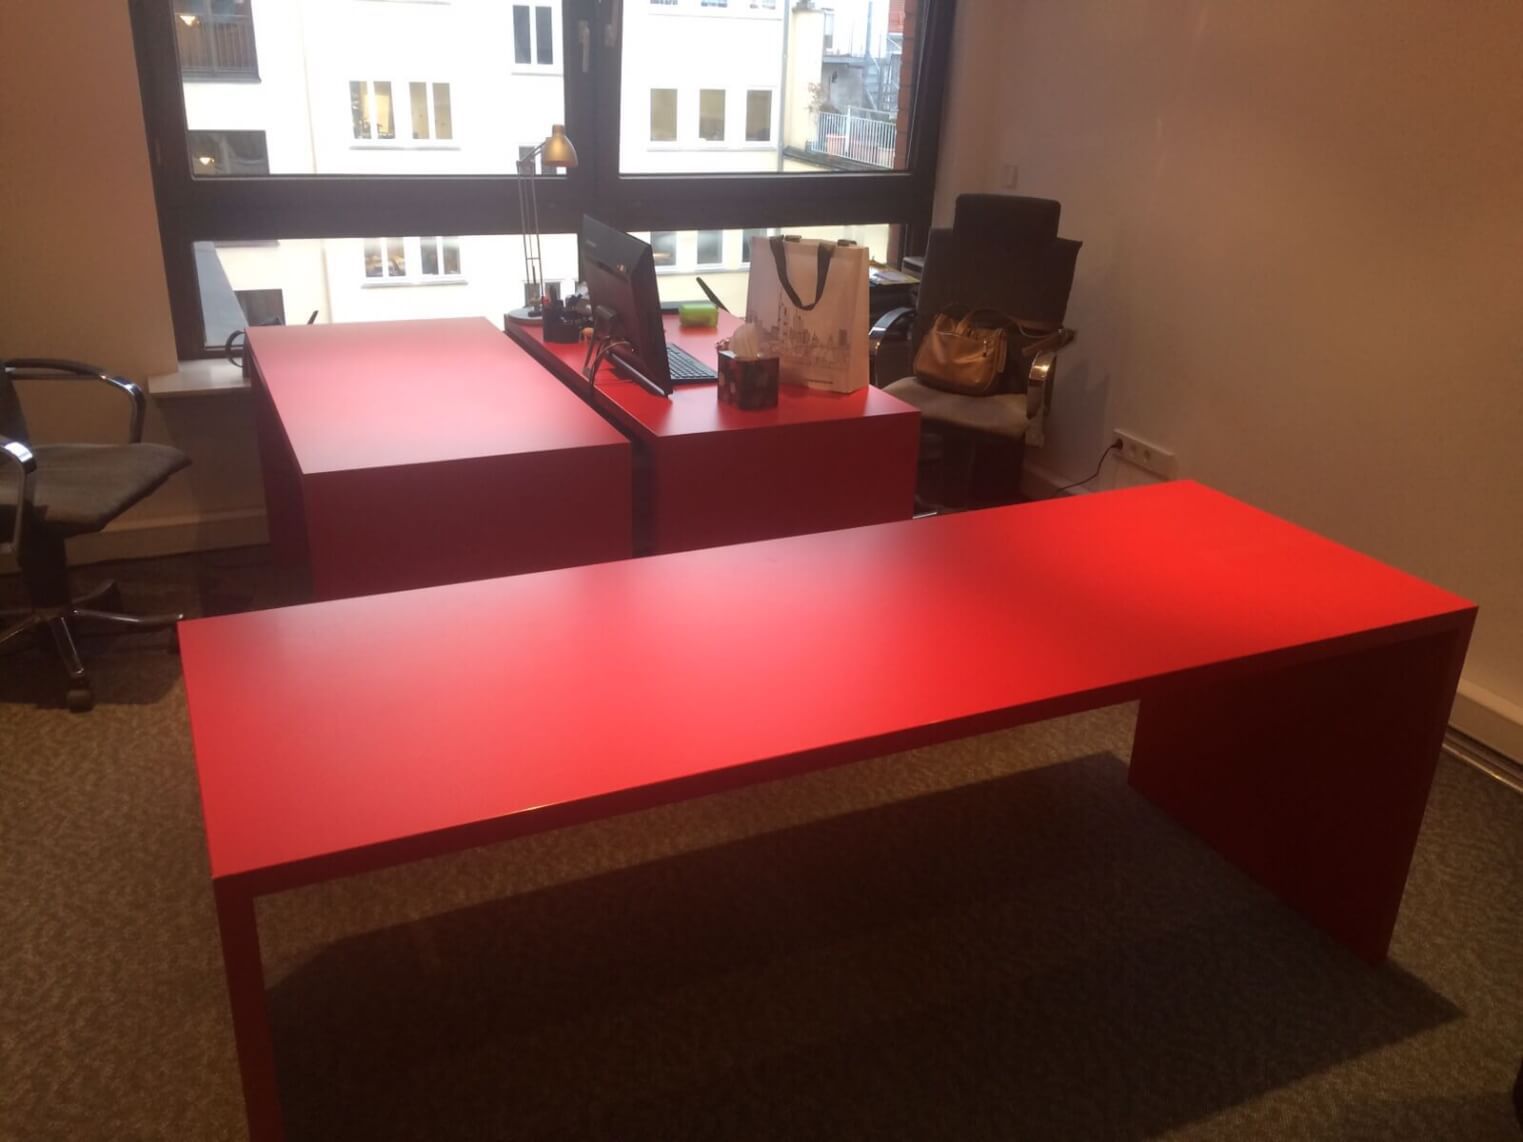 Re-covering an office desk in grey rather than red, cost example, pictures - before